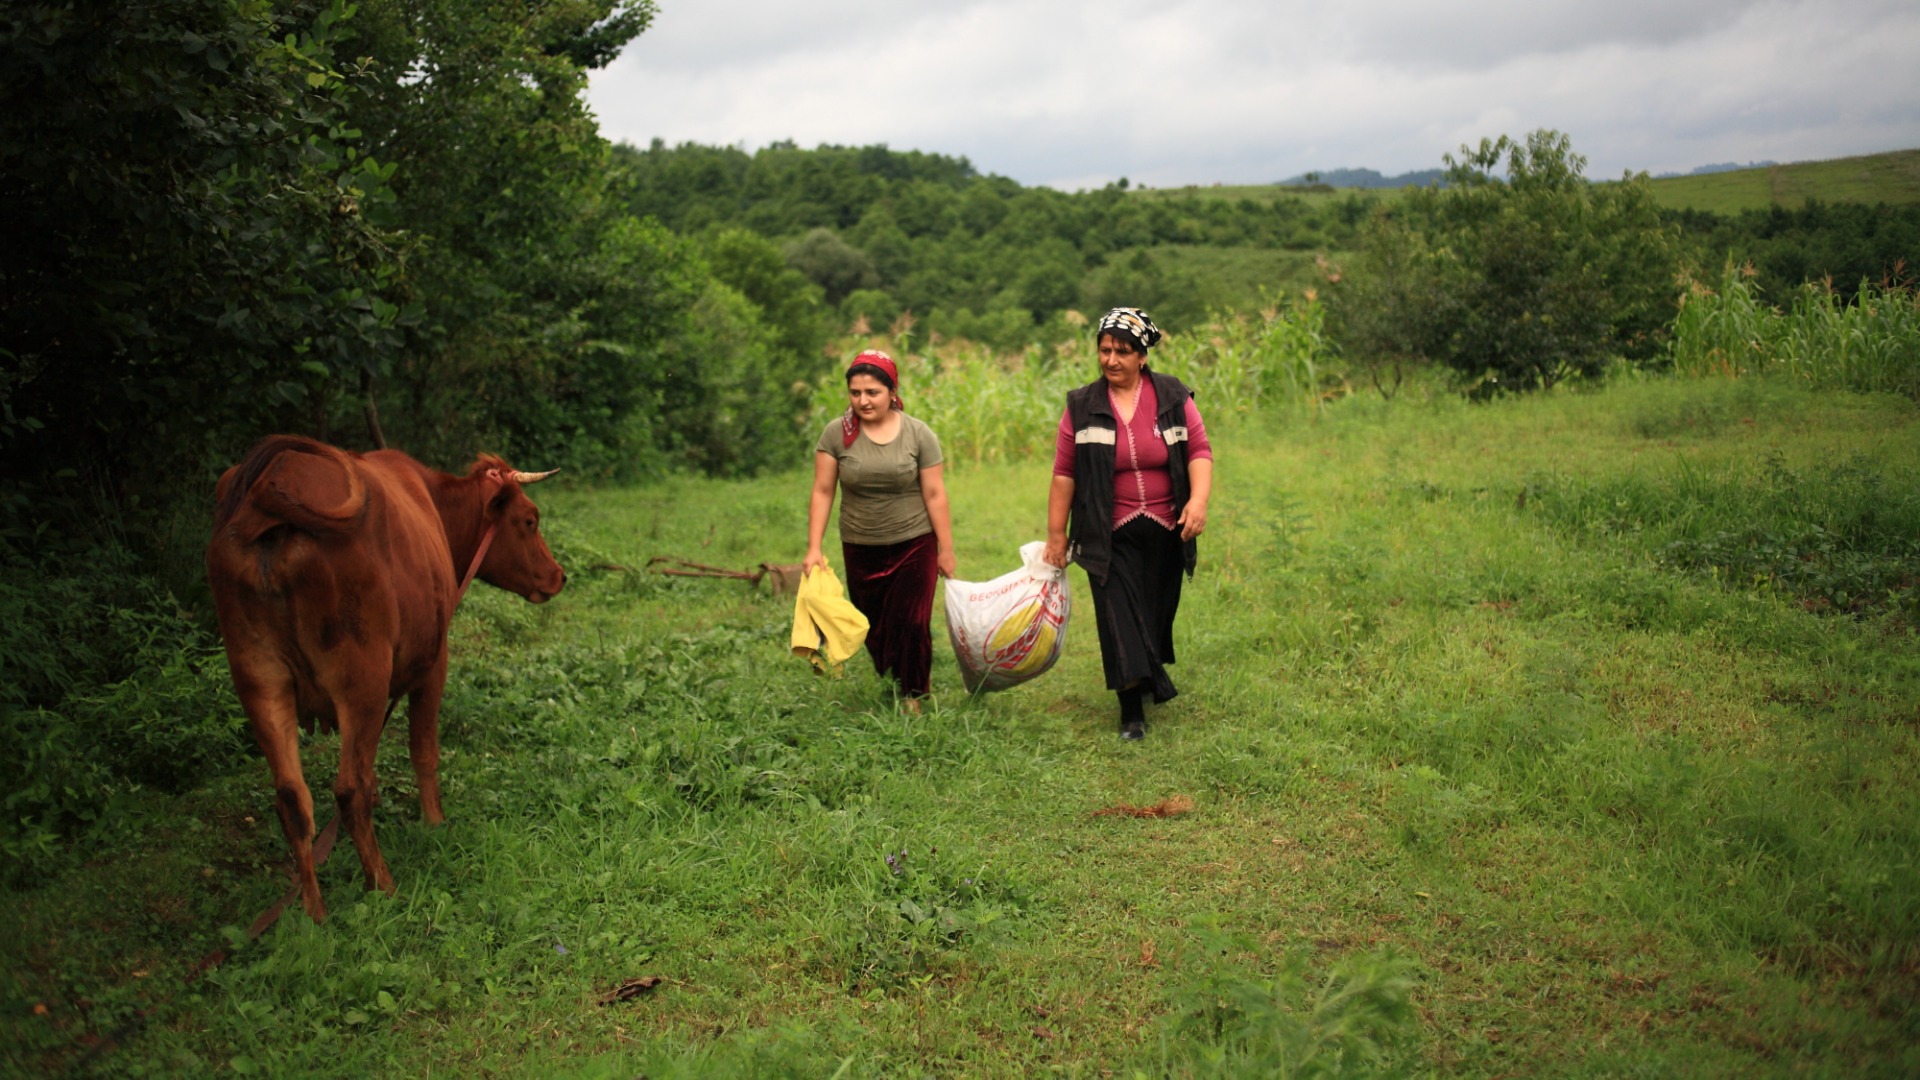 Two women walk in a field with a cow.